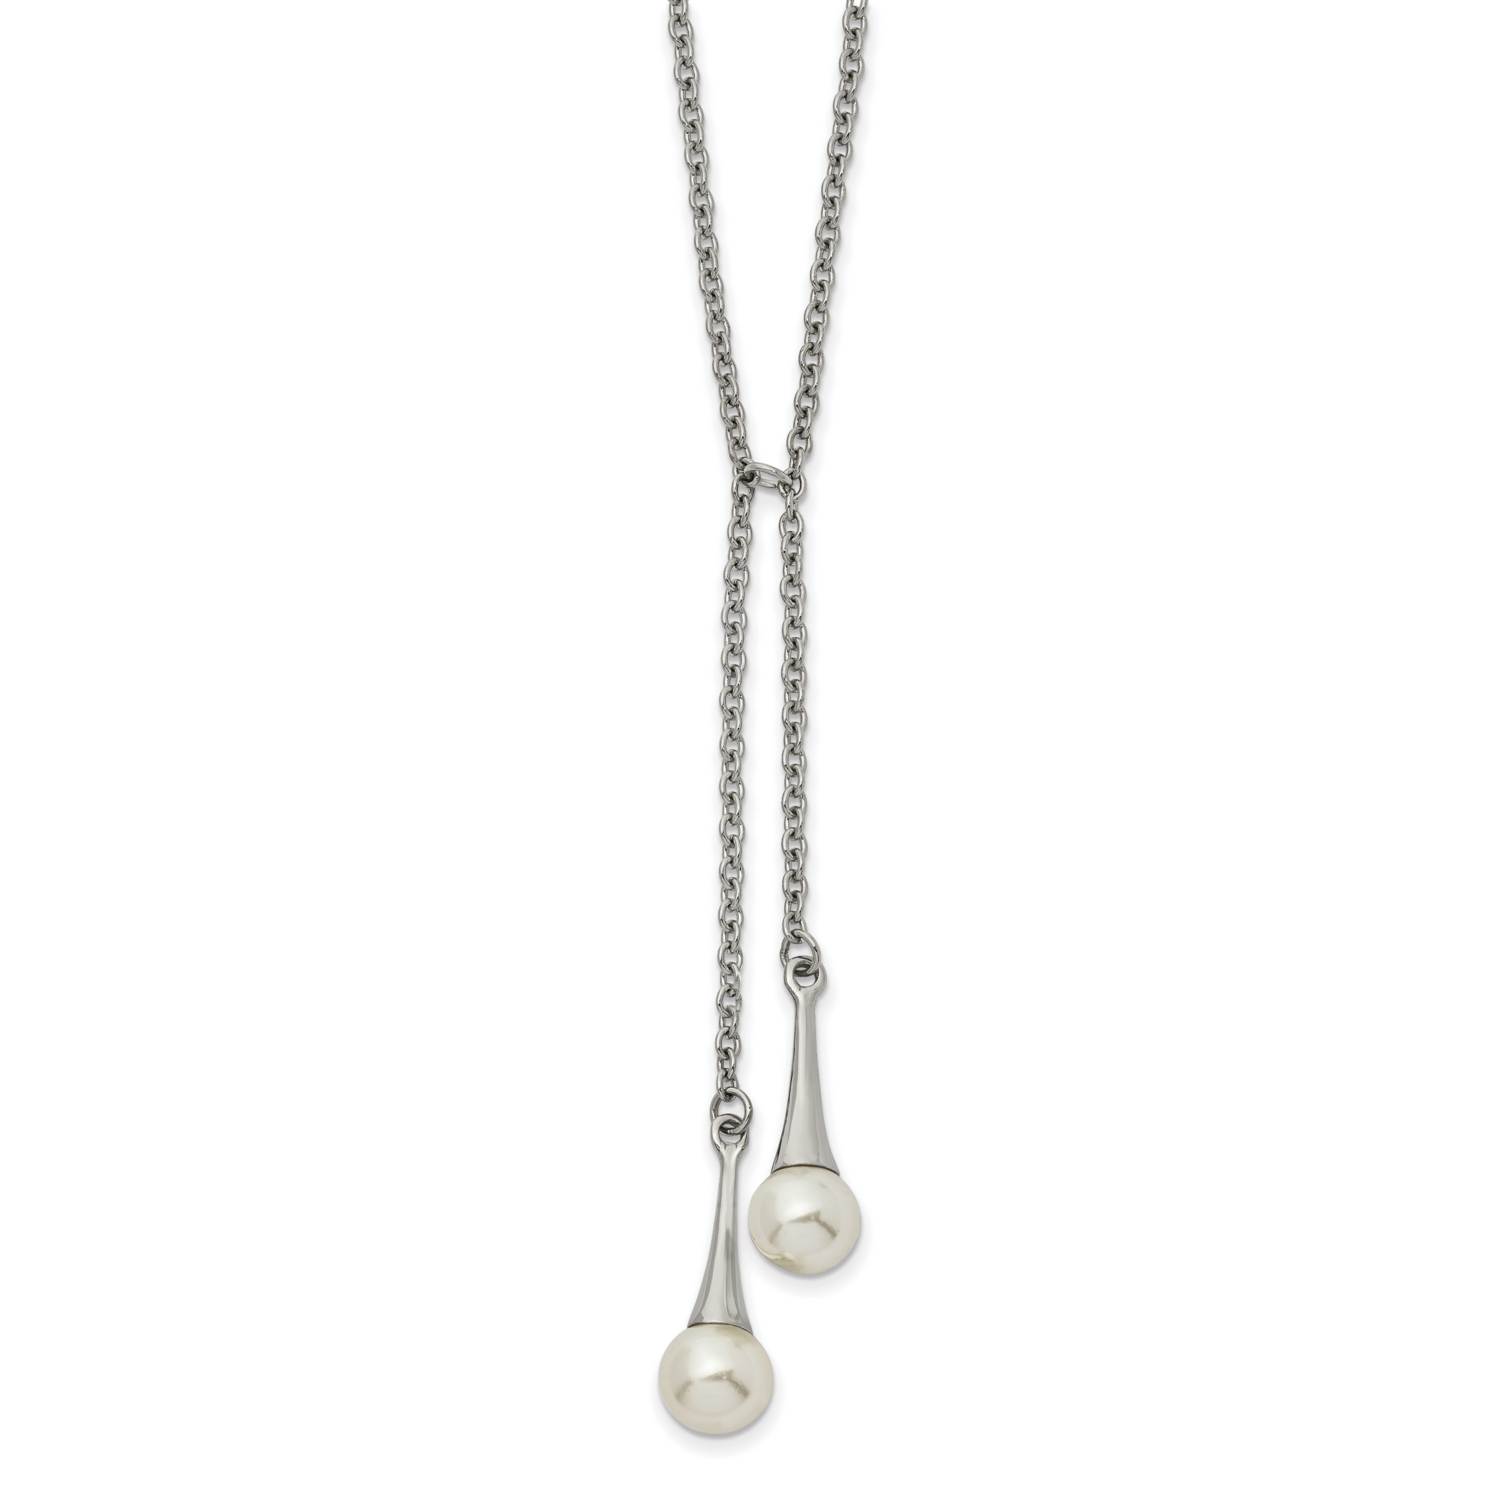 Simulated Pearl 2 Inch Extension Necklace Stainless Steel Polished SRN2144-14